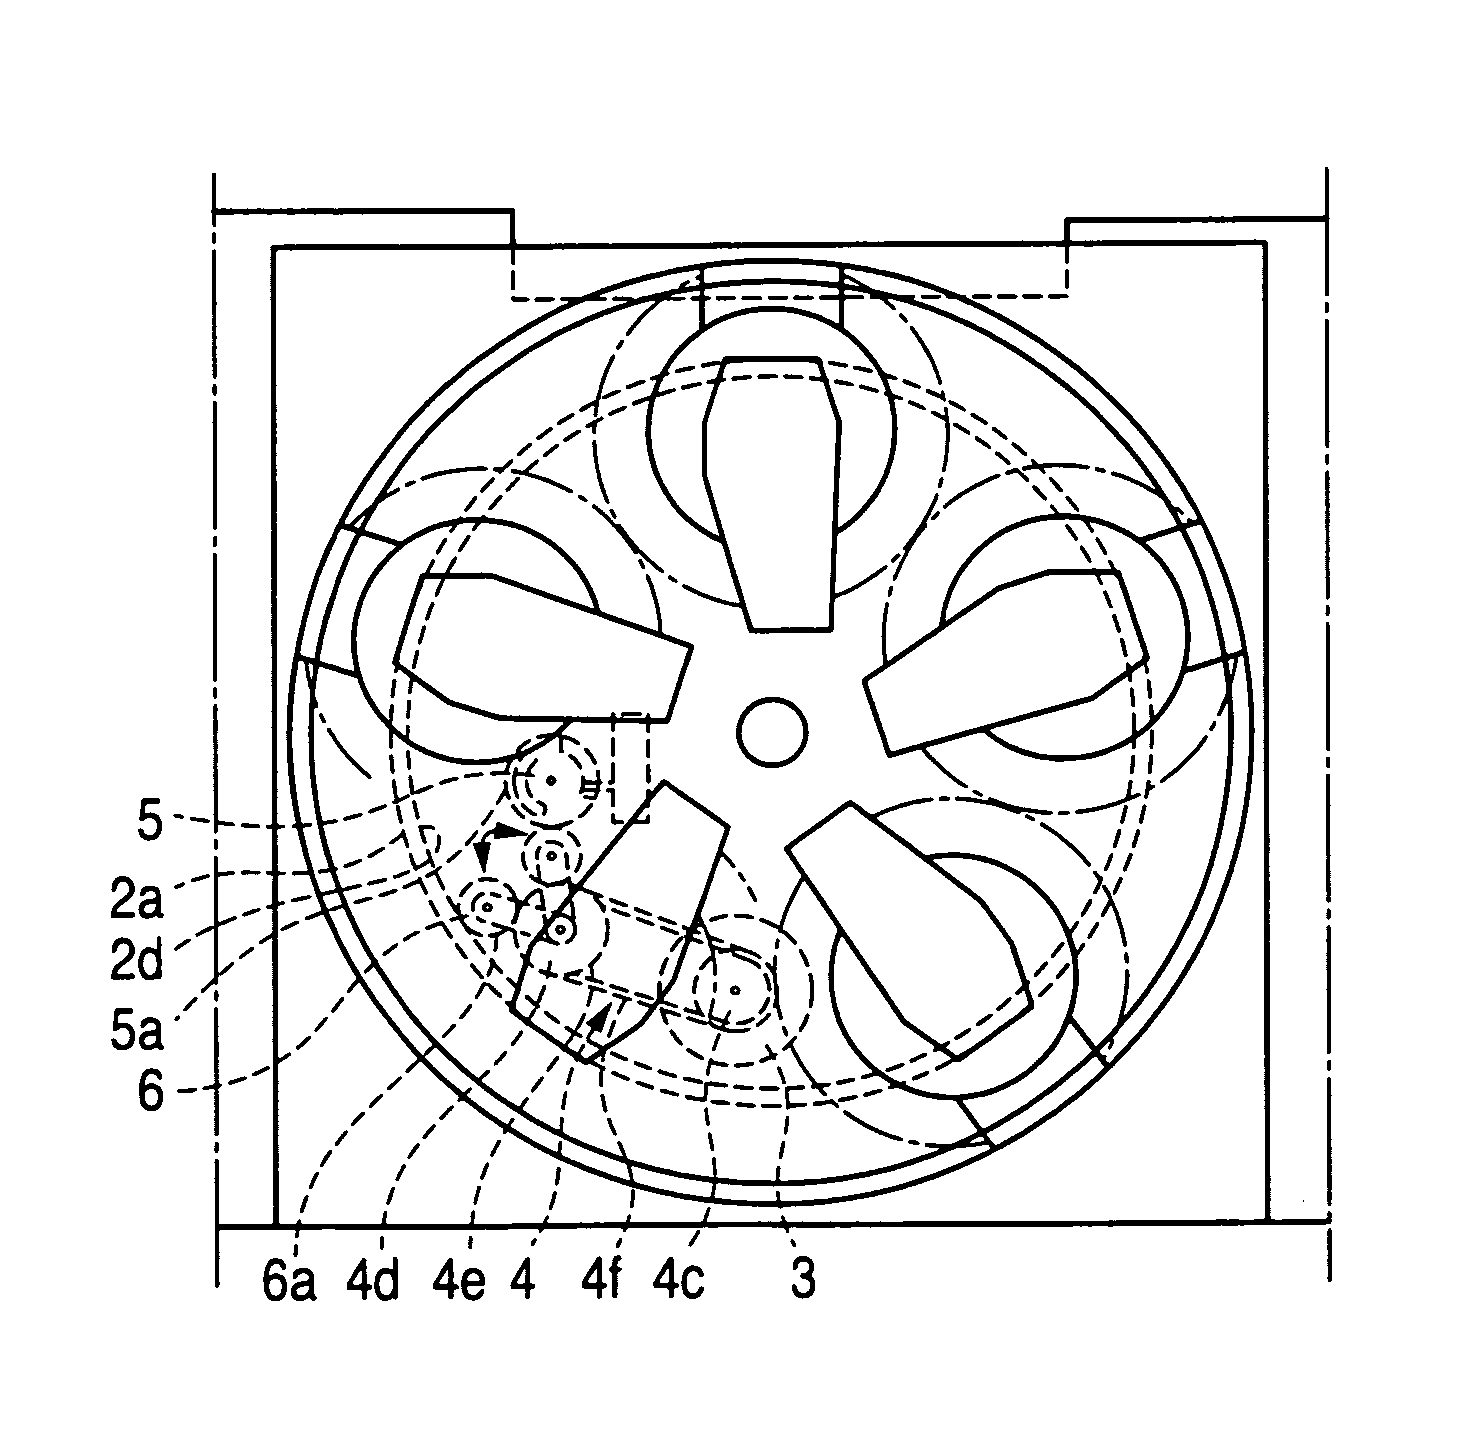 Disk table rotation supporting structure